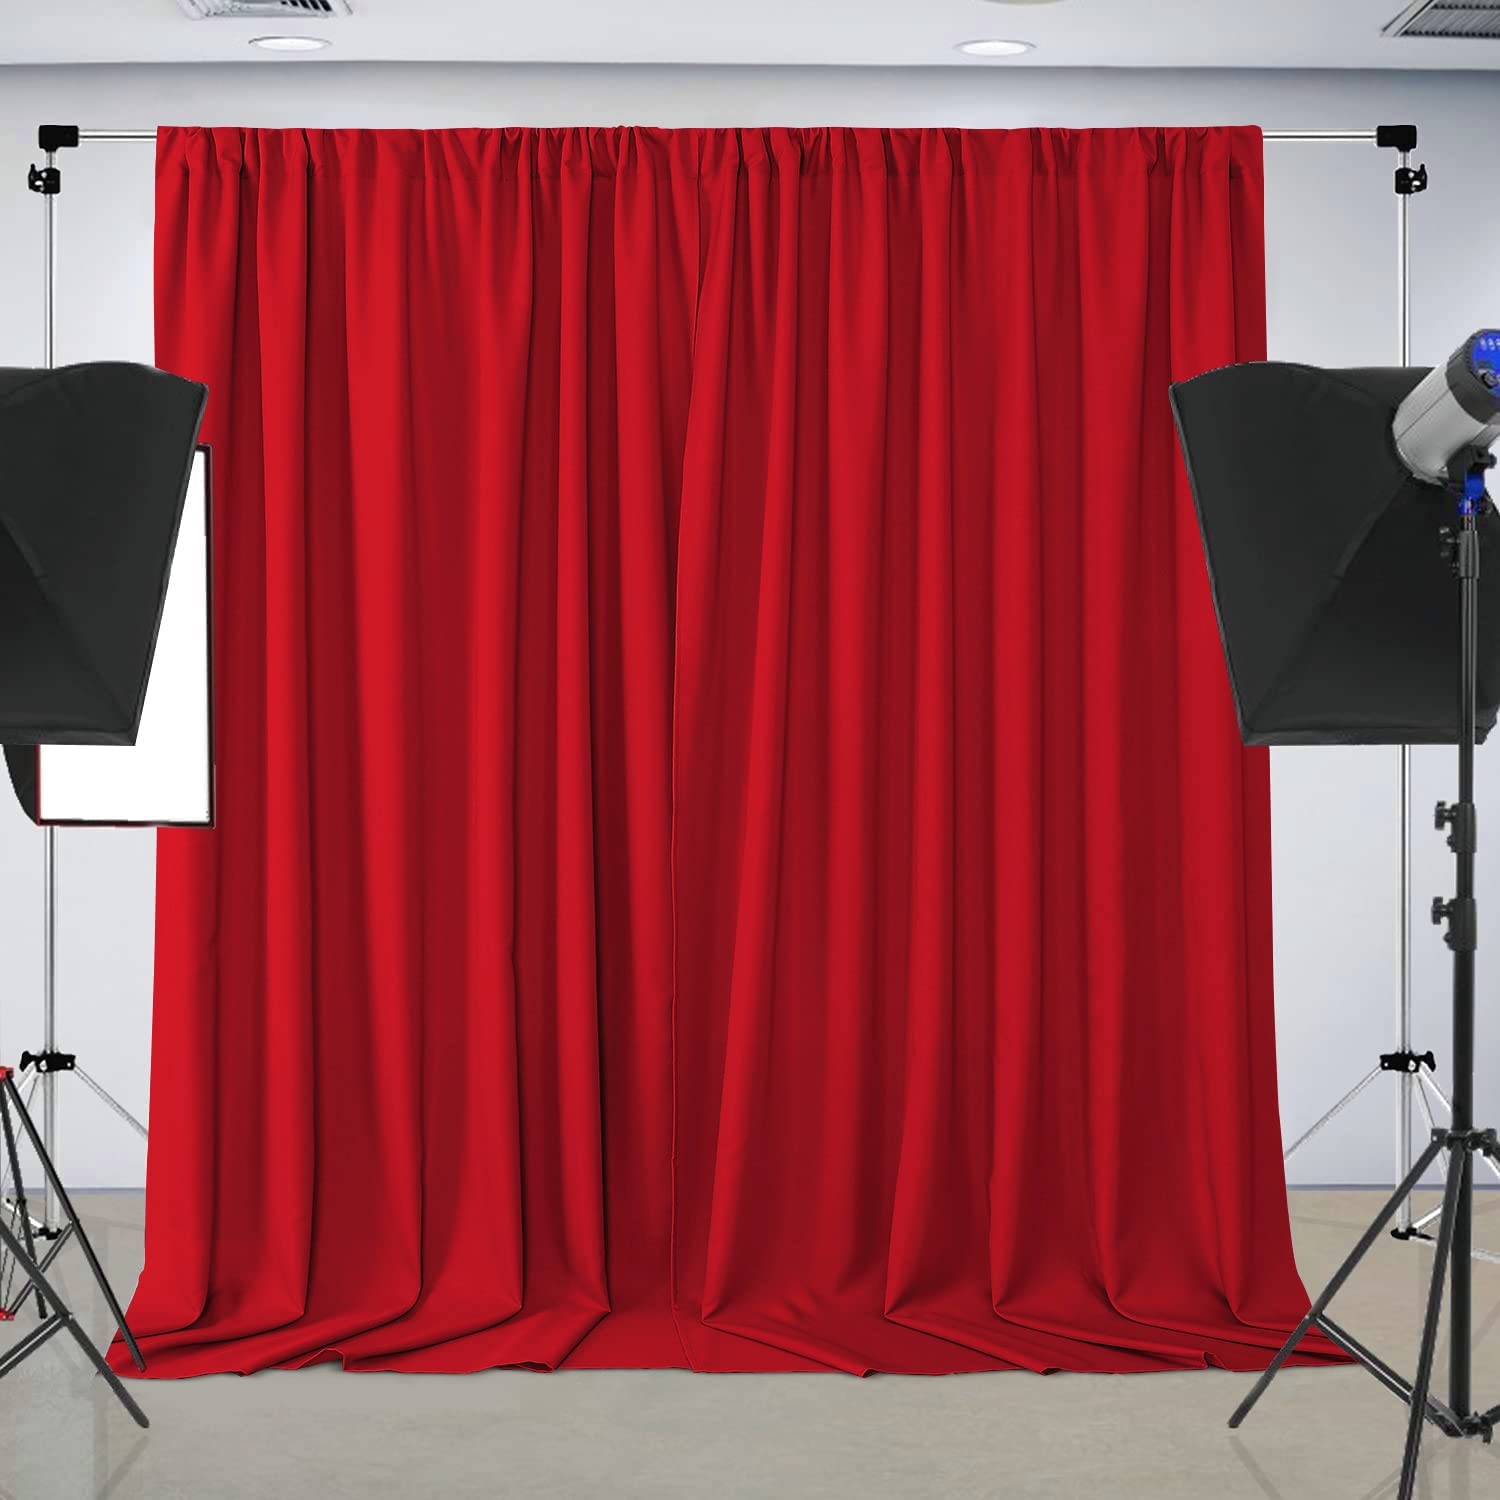 Joydeco Red Backdrop Curtain for Parties, Photography Backdrop Drapes for Wedding Background Decorations, Wrinkle Free 5ft x 10ft Set of 2 Panels Curtains with Rod Pockets